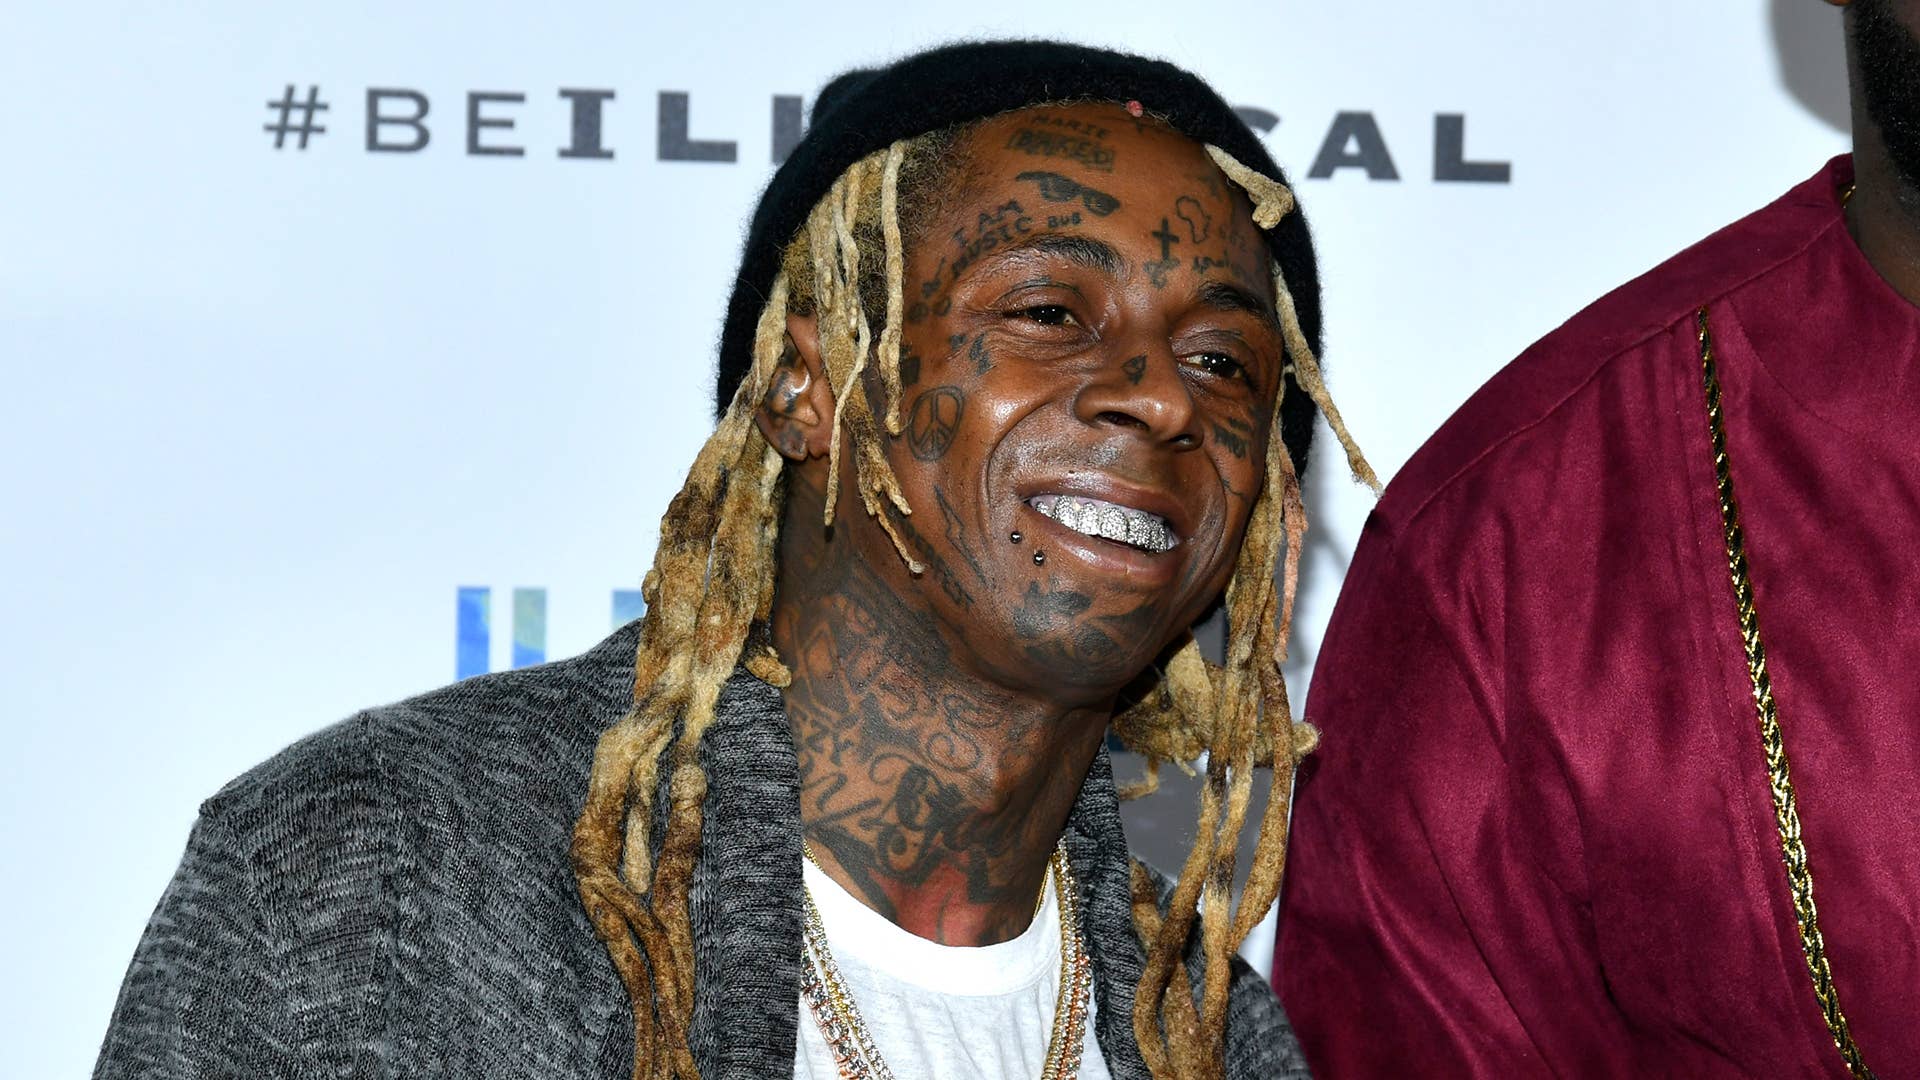 Hip-hop artist Lil Wayne attends the launch party for Emmanuel Acho's new book "ILLOGICAL"